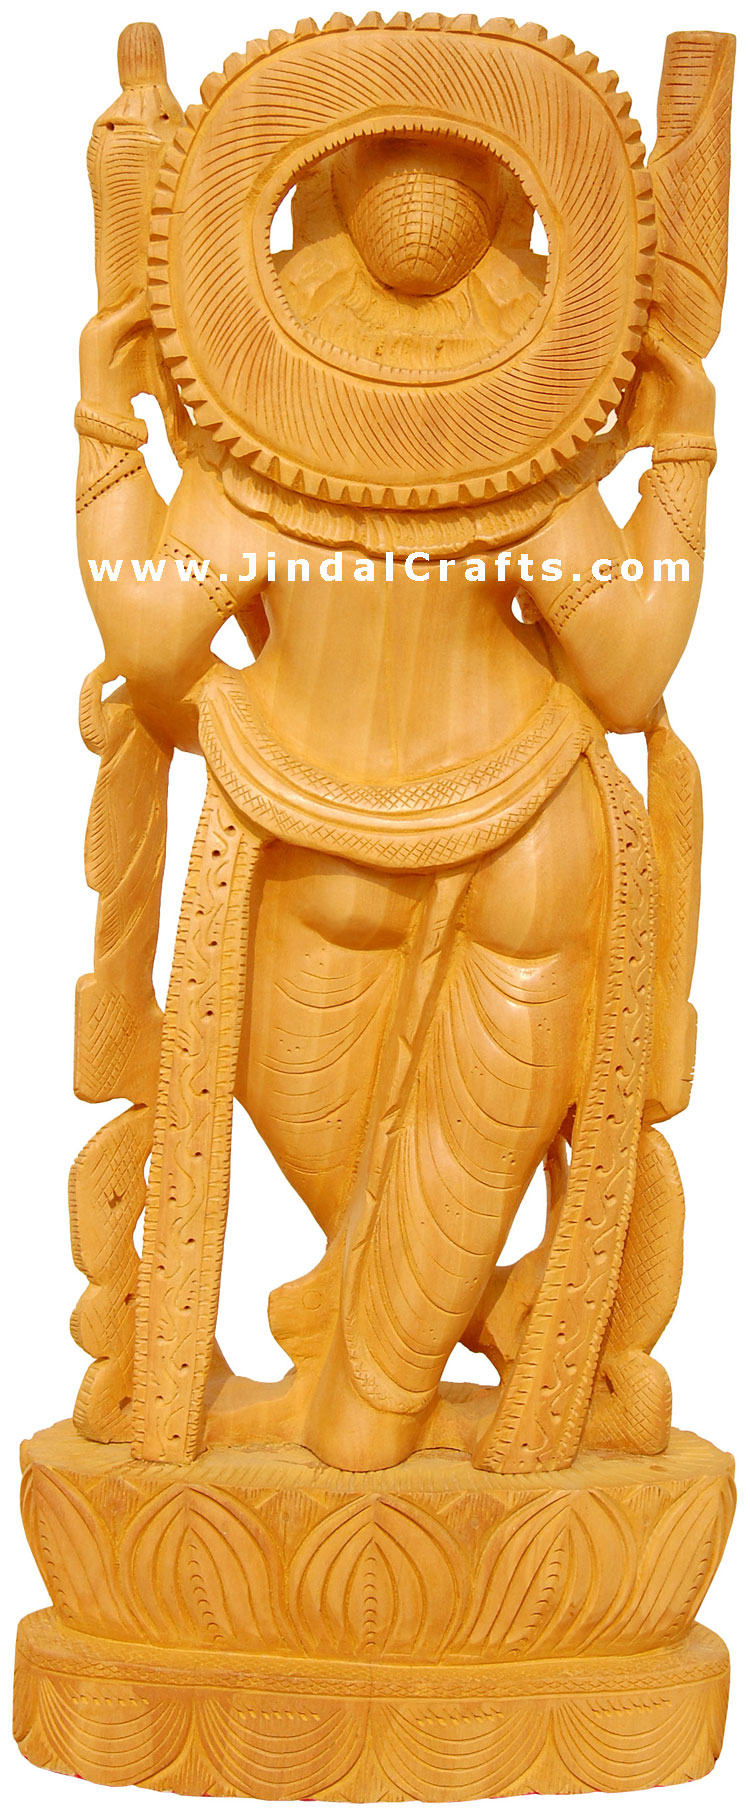 Handcrafted Ganesh - Indian Fine Sculpture Religious